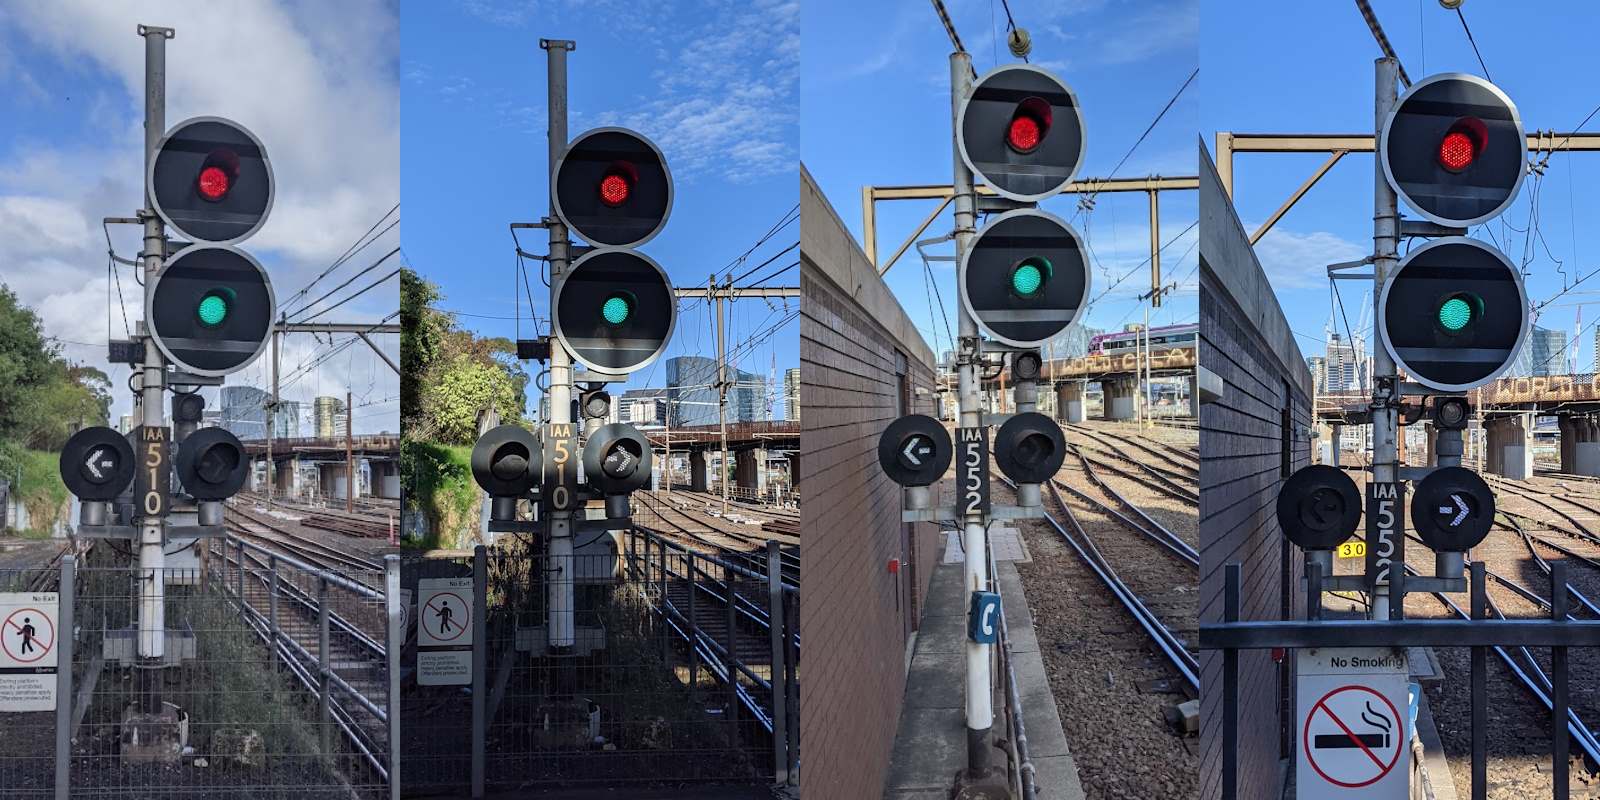 Four photos of two signals with left or right white arrows lit